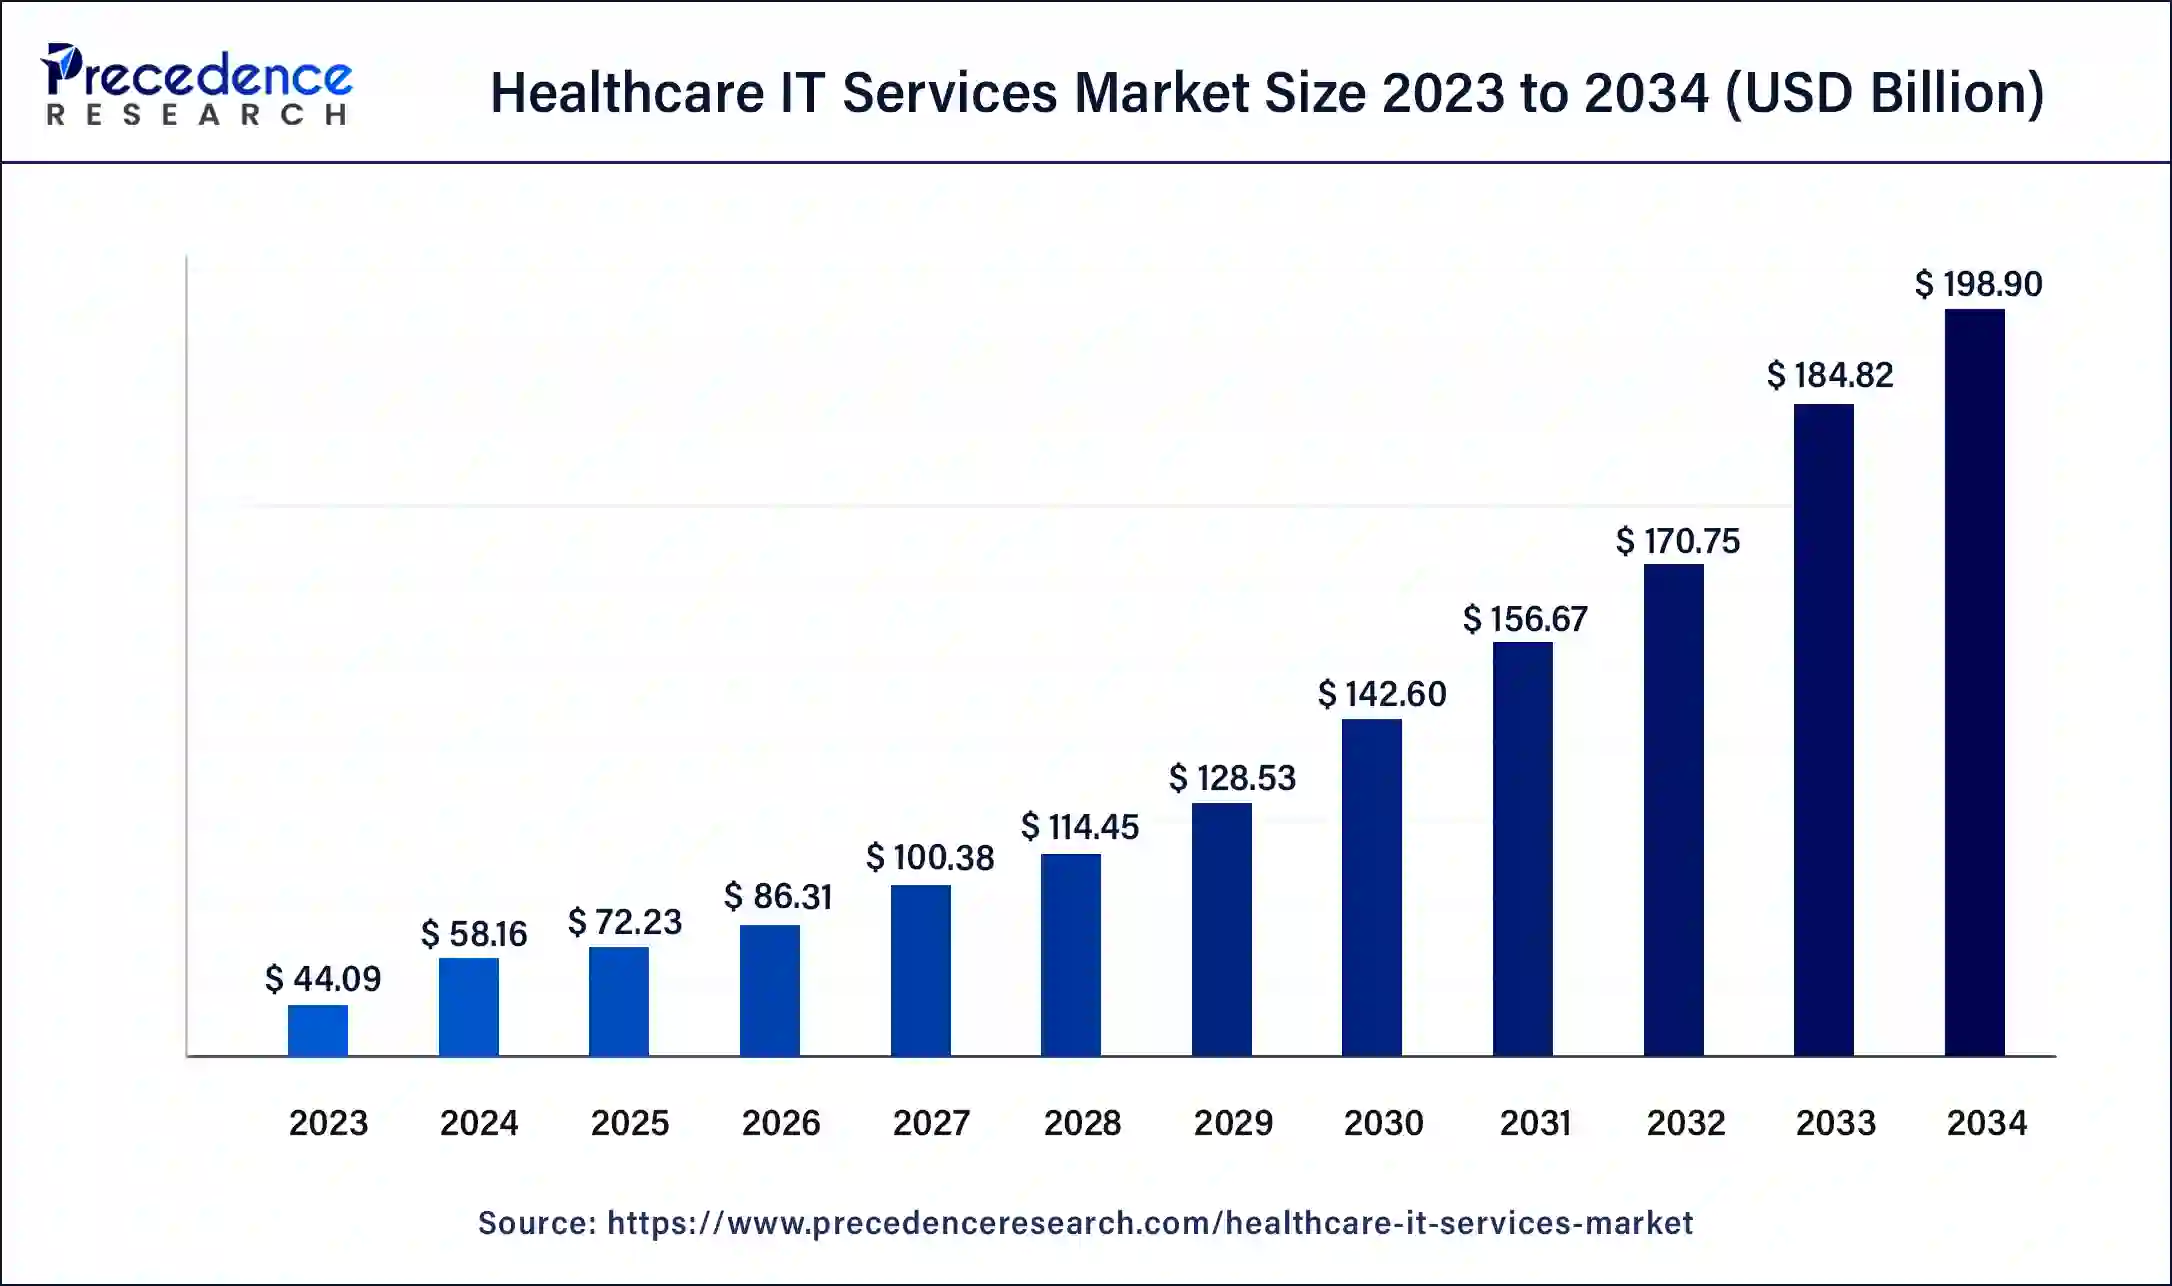 Healthcare IT Services Market Size 2024 To 2034